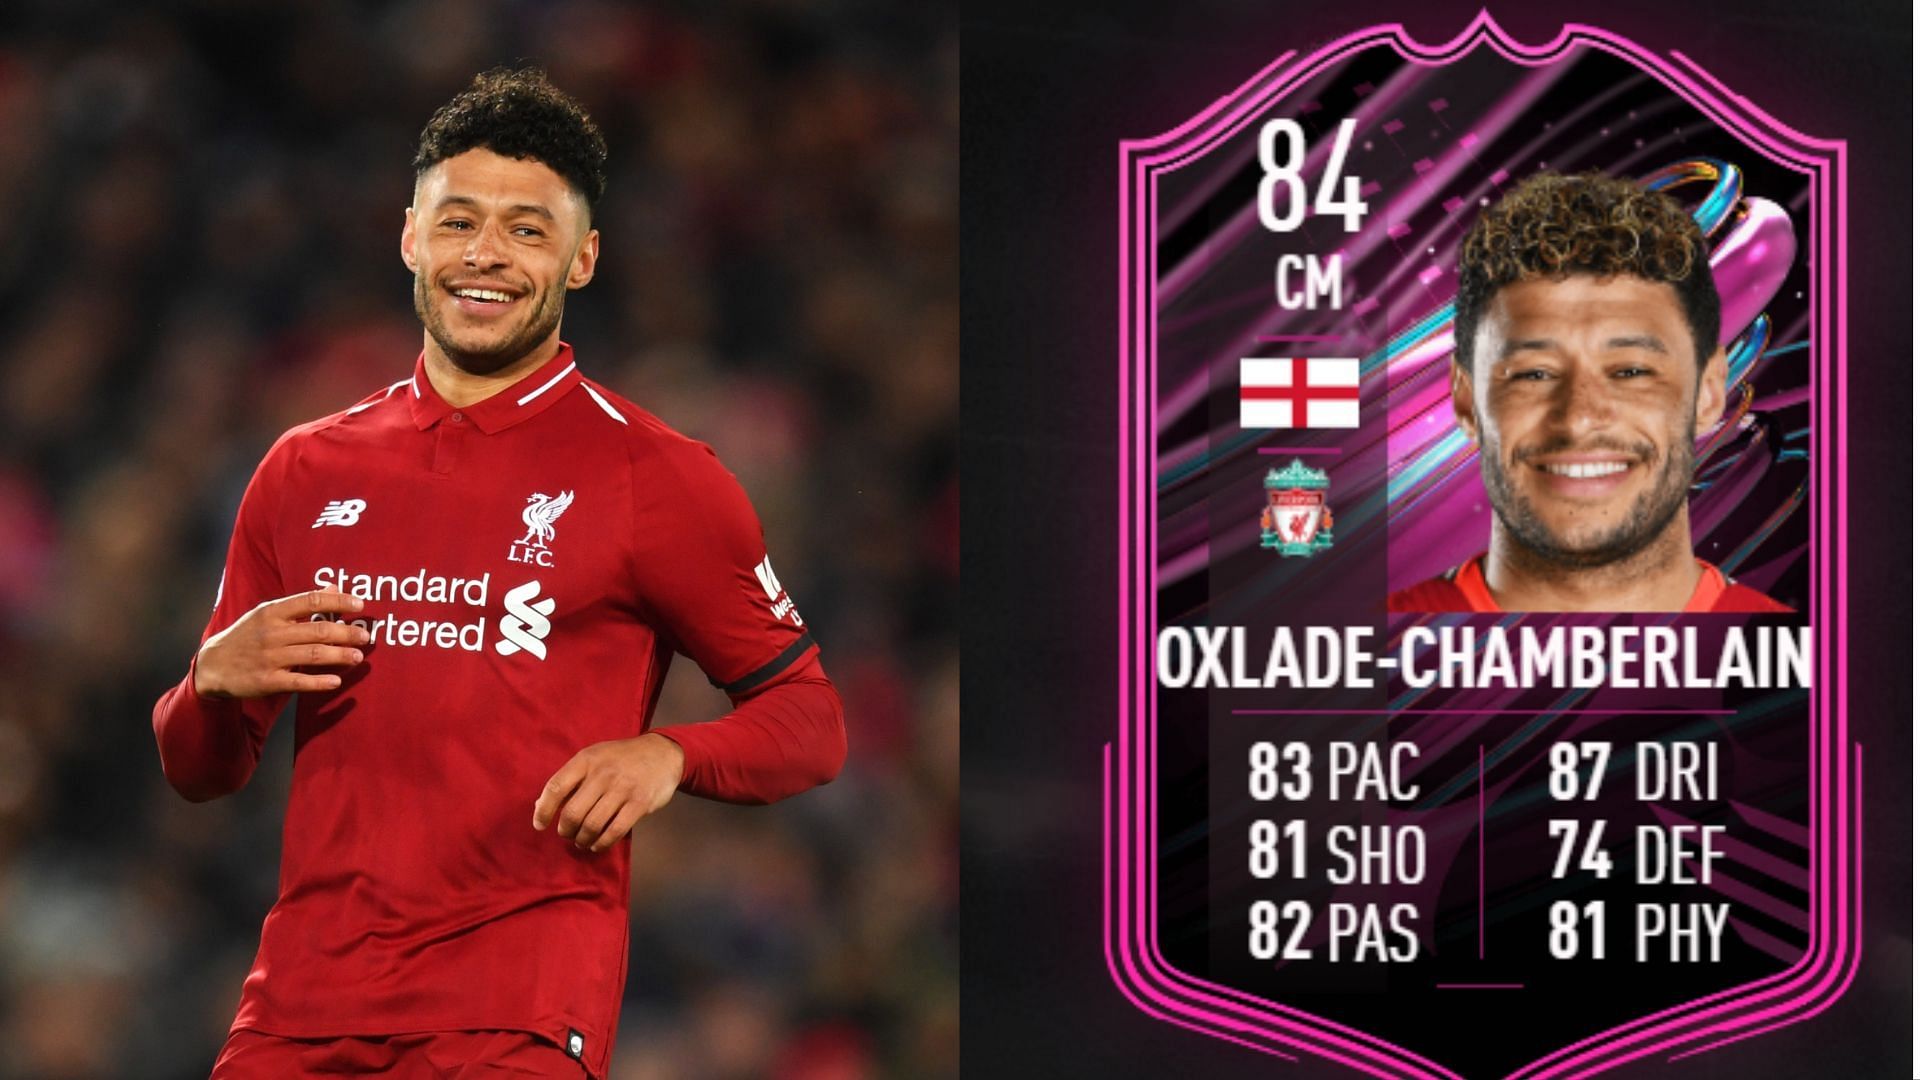 The Alex Oxlade-Chamberlain FUT Ballers SBC has excellent value for FIFA 23 players (Images via TalkSport, EA Sports)